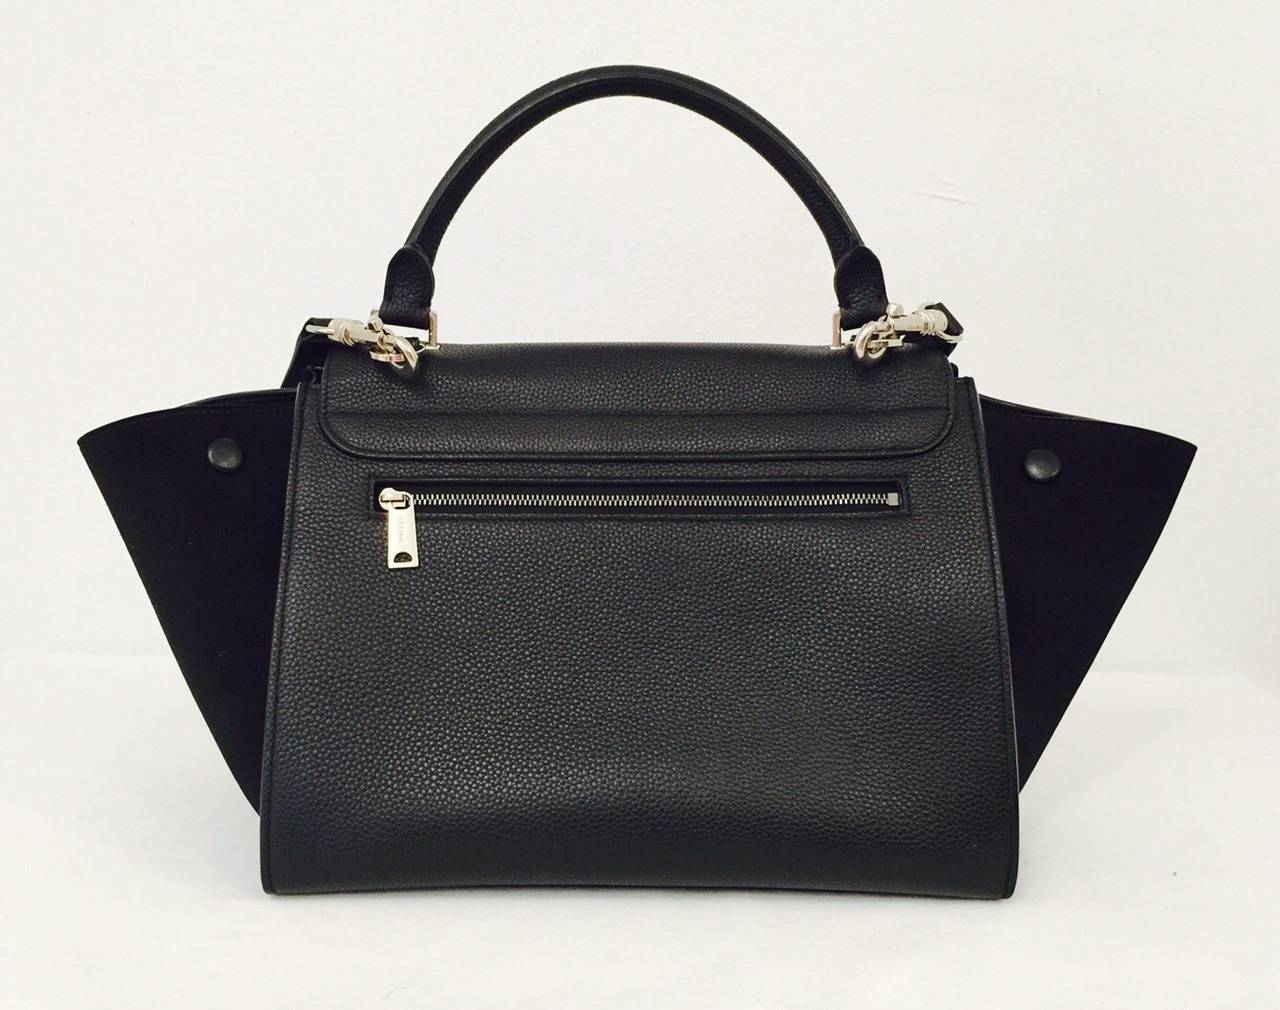 Coveted Céline Mini Trapeze Bag in Black is lovingly carried by some of the world's most stylish women!  This new classic shape is easily recognized from Hollywood to Bollywood and all points in between.  Features grained leather, full frontal flap